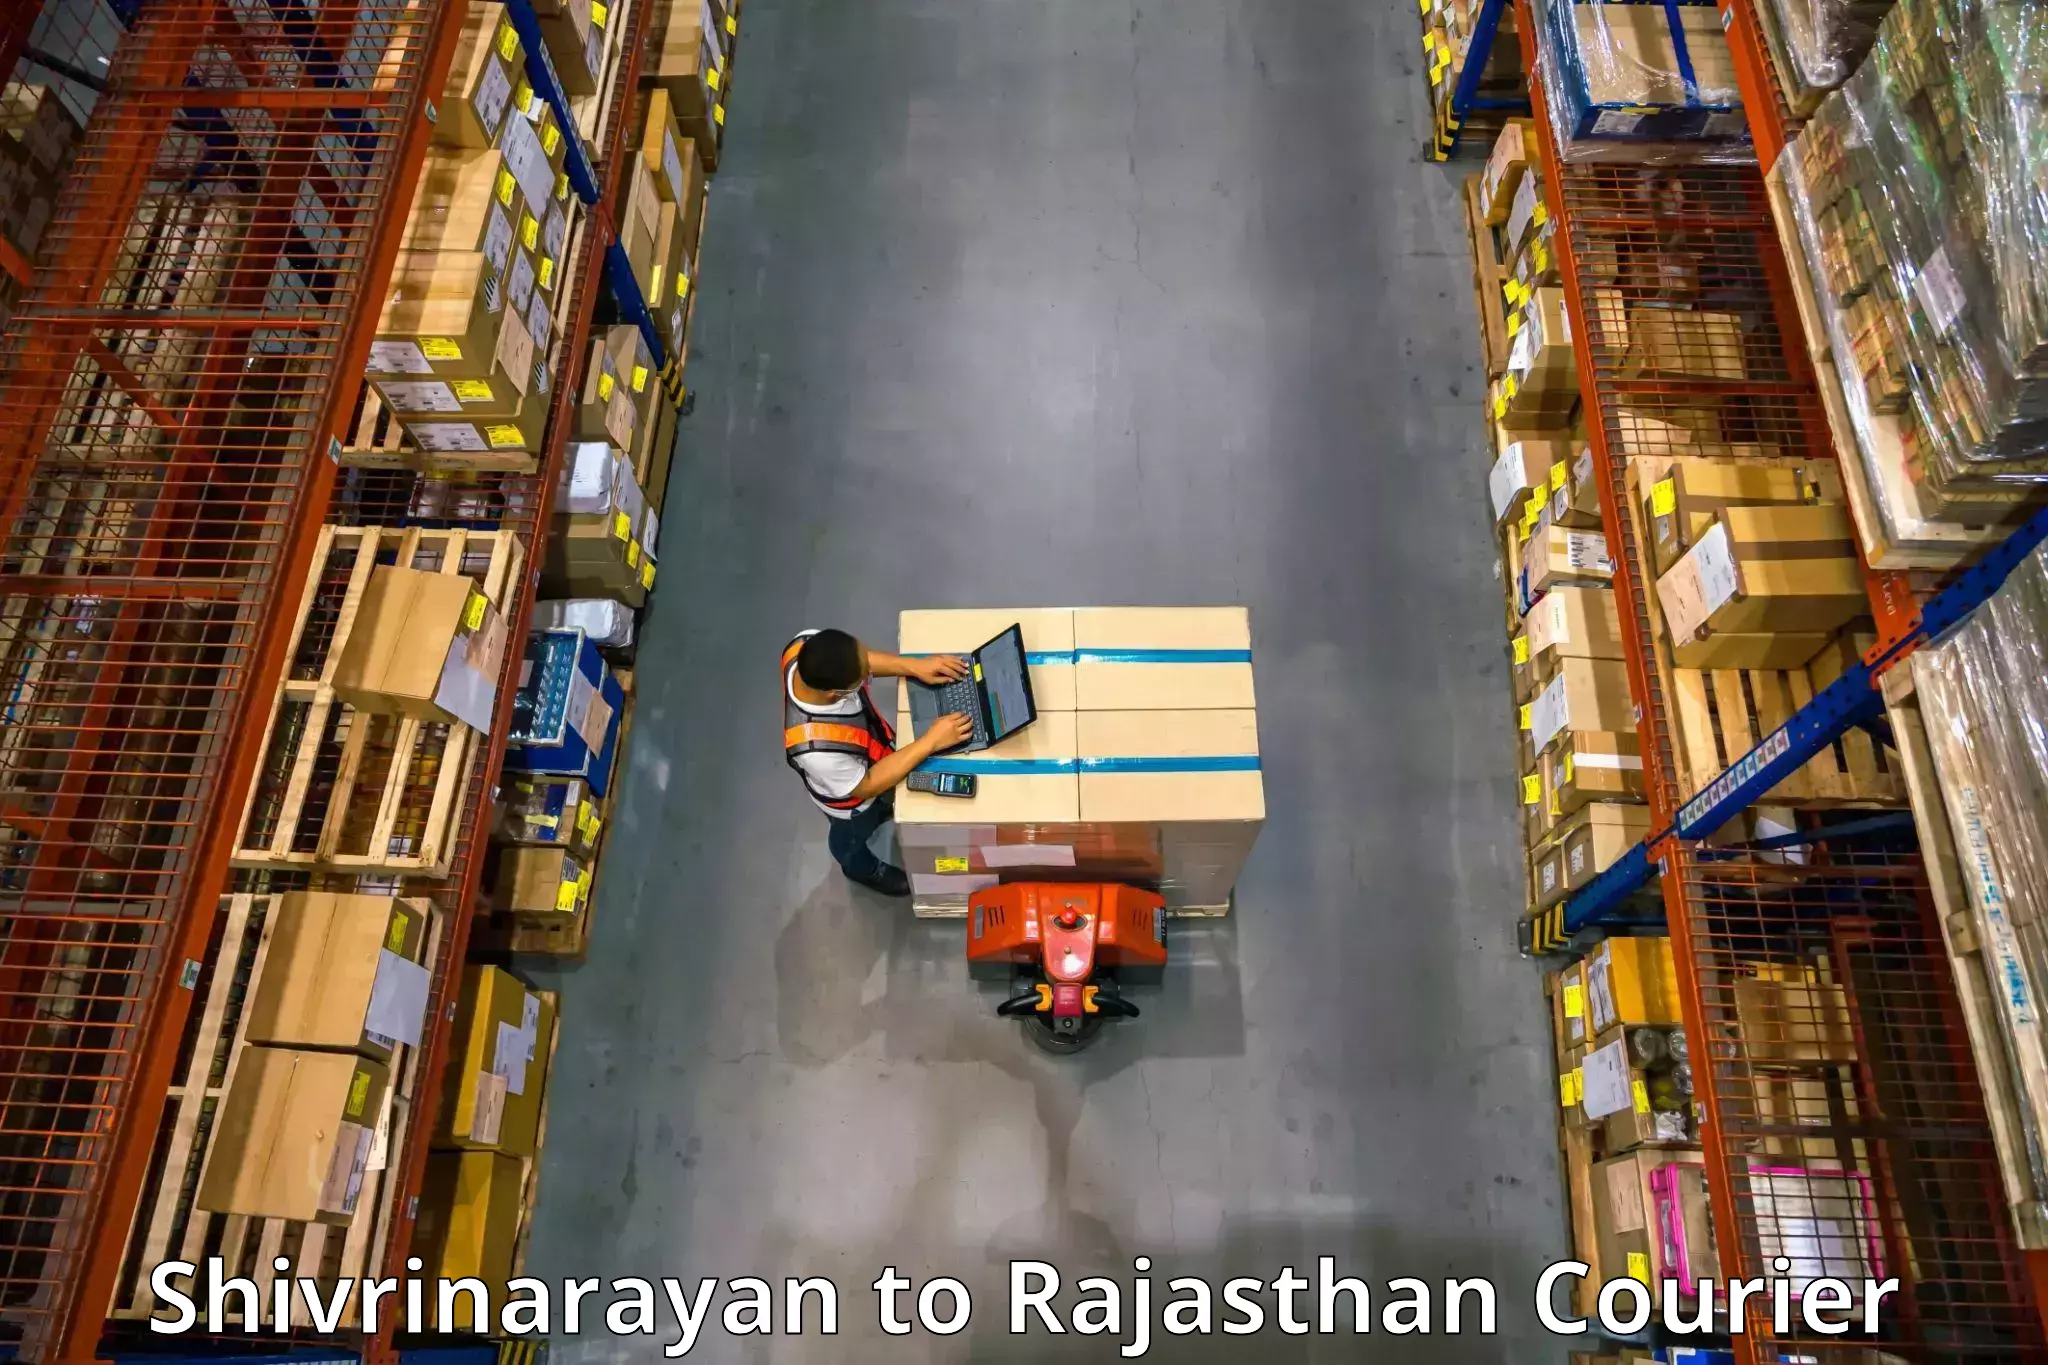 Trusted moving company Shivrinarayan to Yeswanthapur